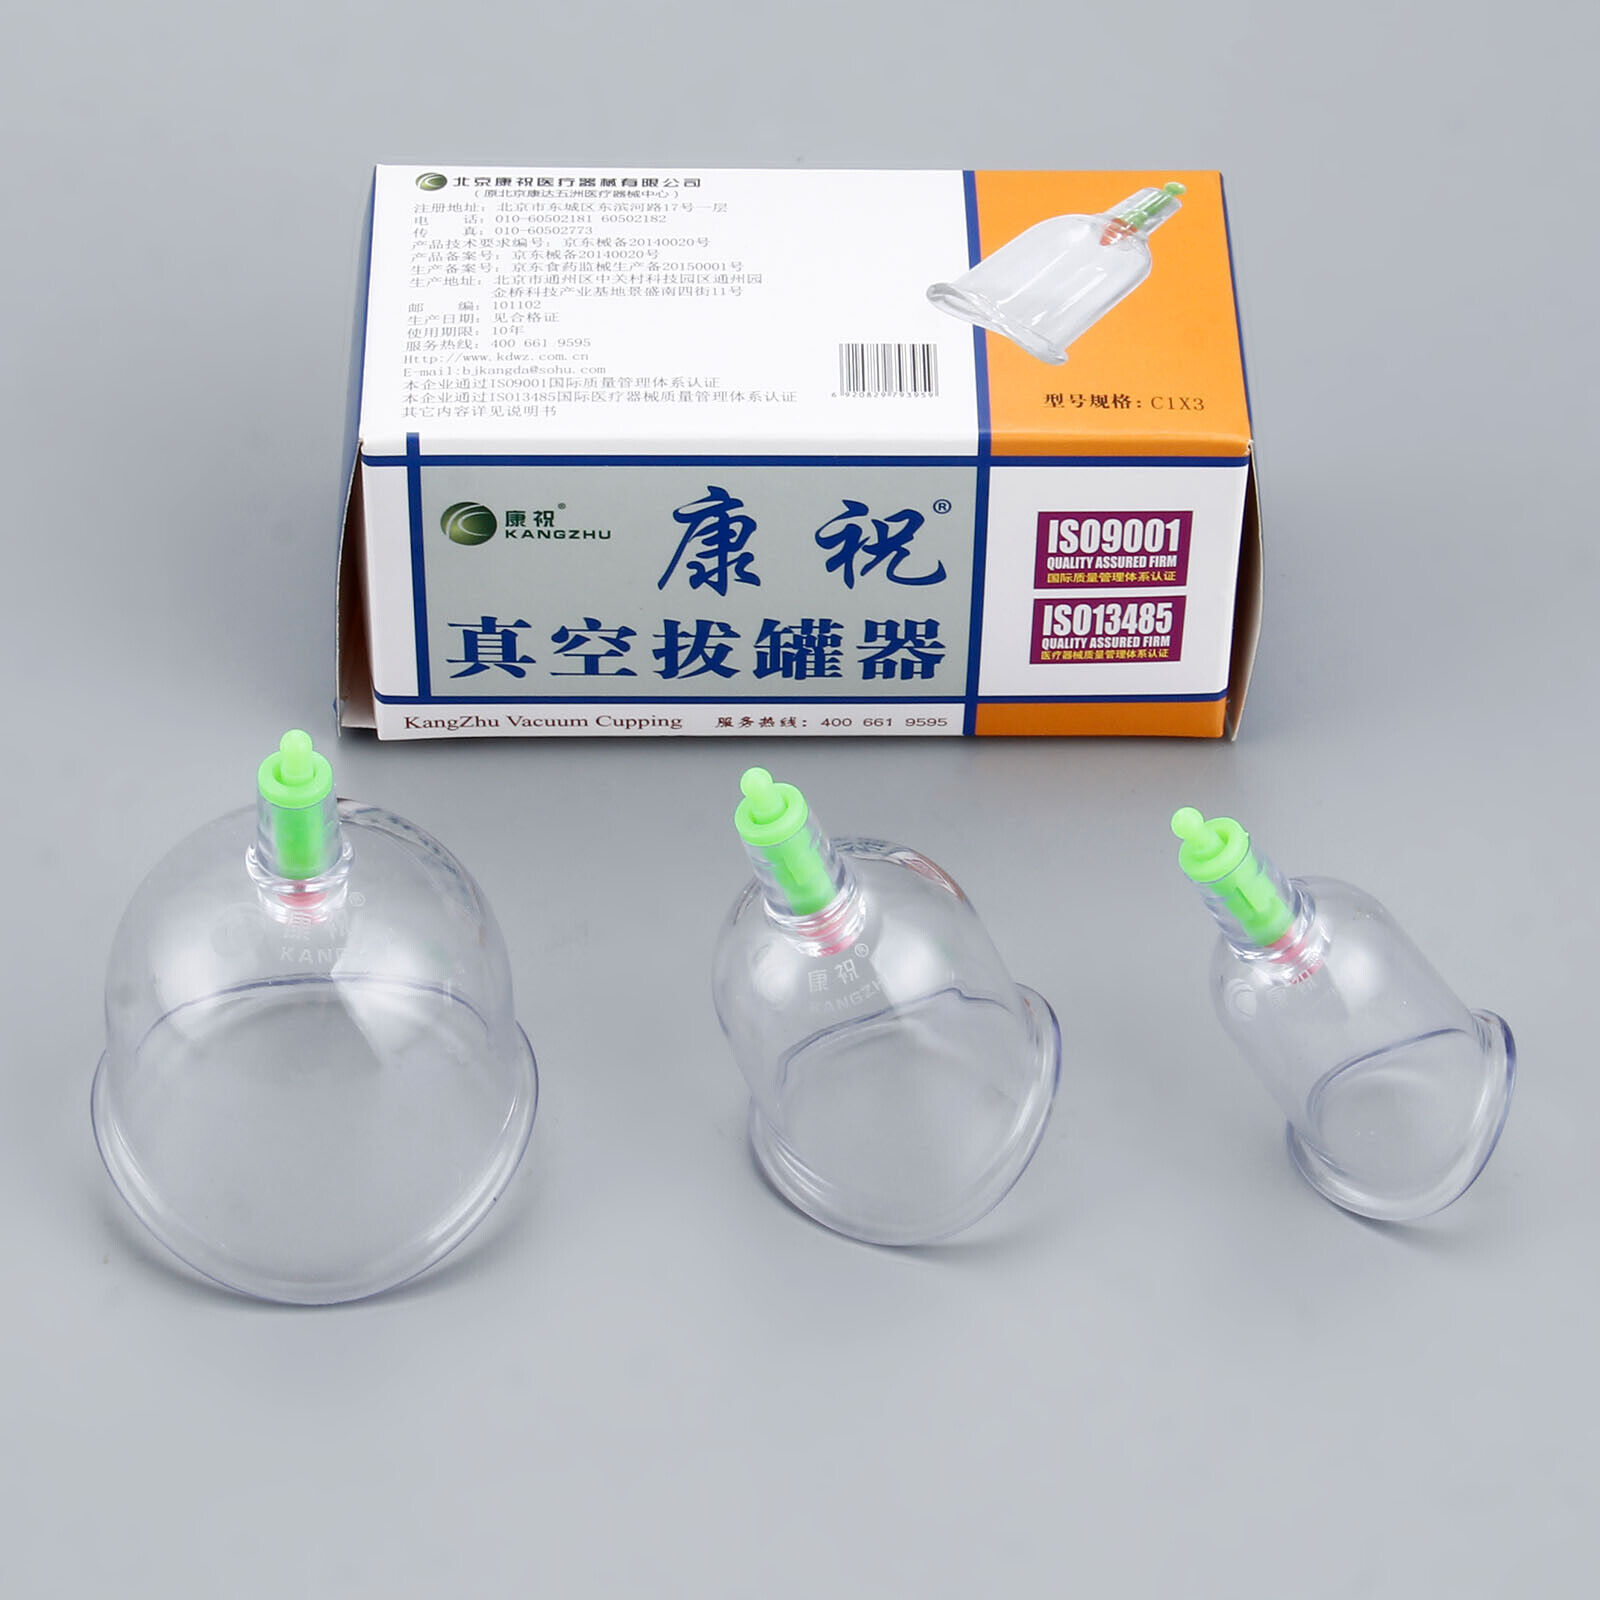 Curved Vacuum Cups Cupping Physical Therapy for Joints Arthritis Massage Set Unbranded/Generic Does Not Apply - фотография #4